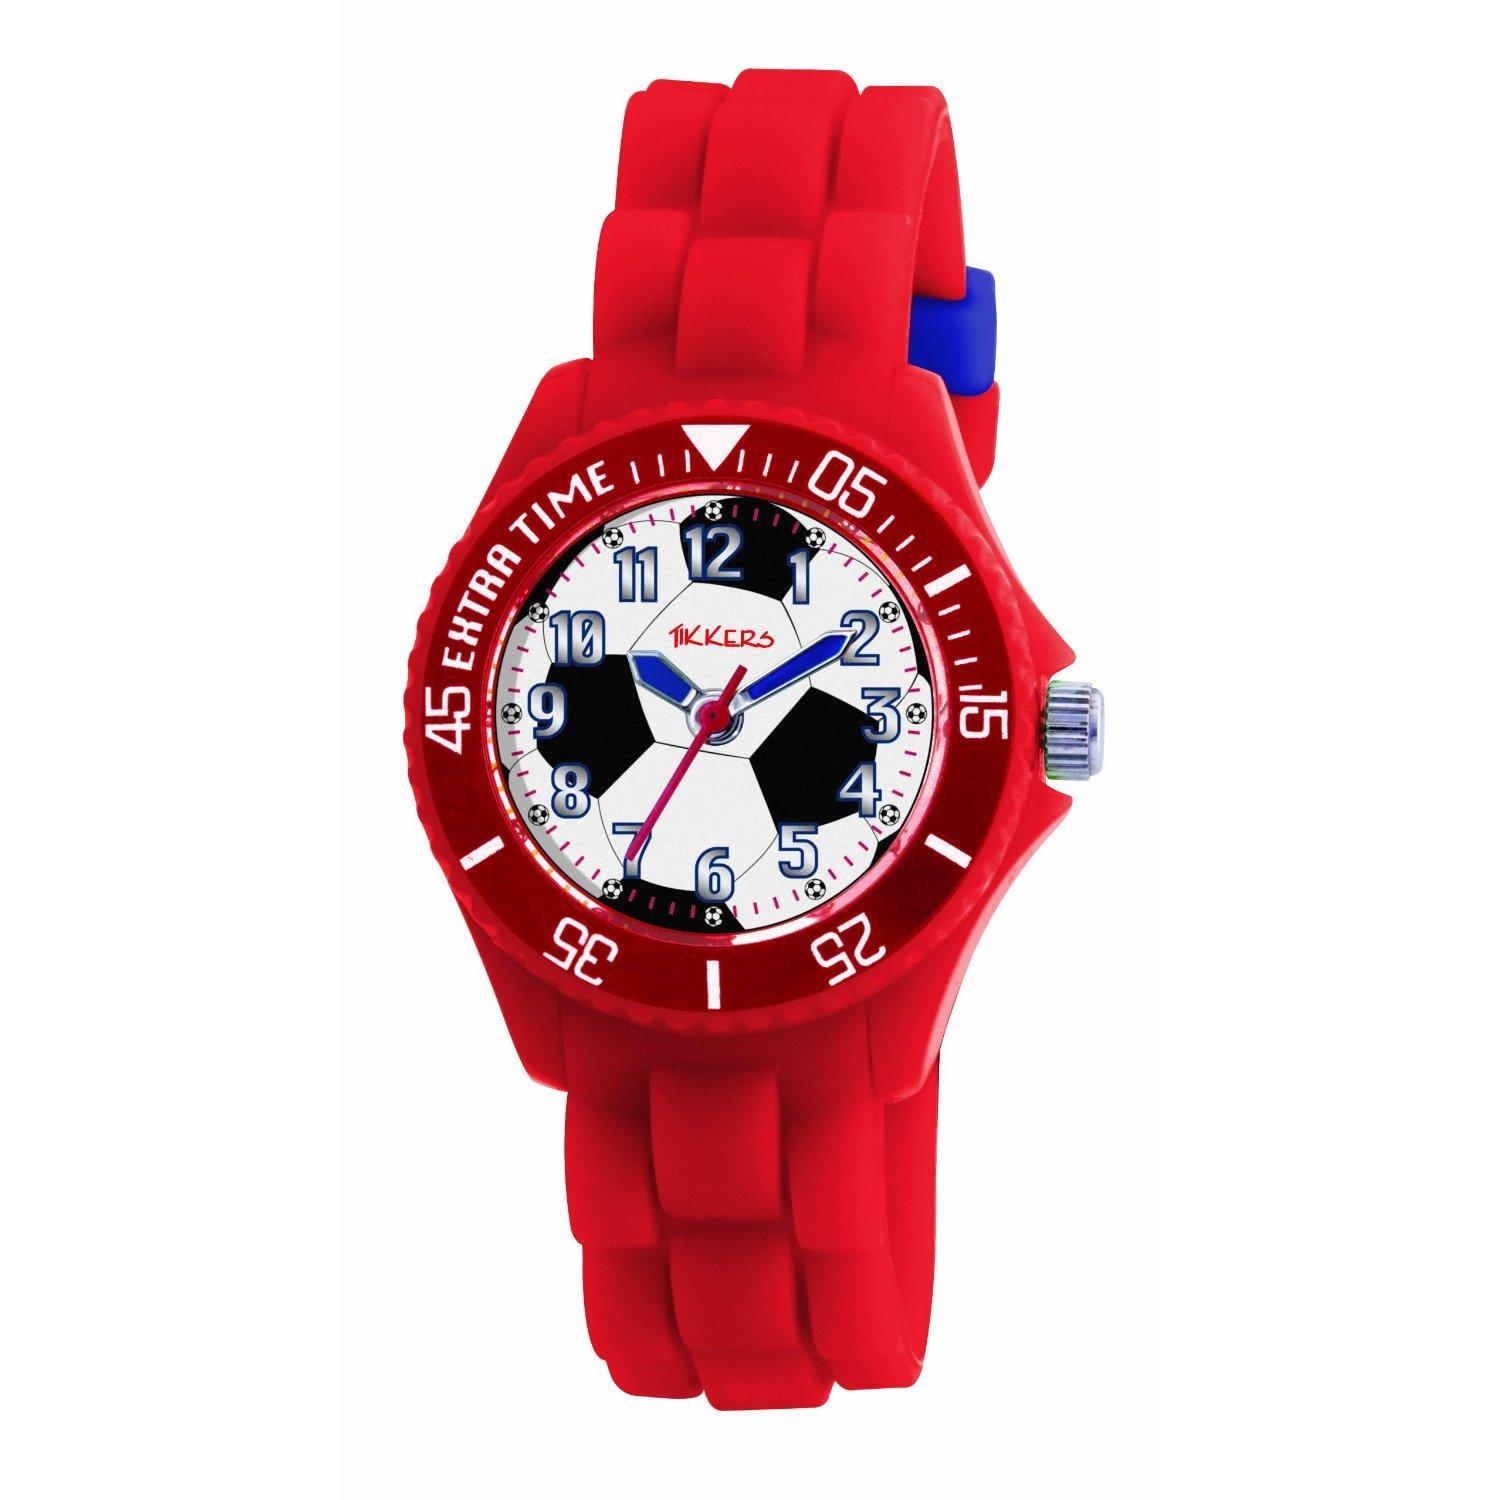 Foto Tikkers TK0026 Boys Red Rubber/Silicone Strap Football Watch TK0026 foto 881740